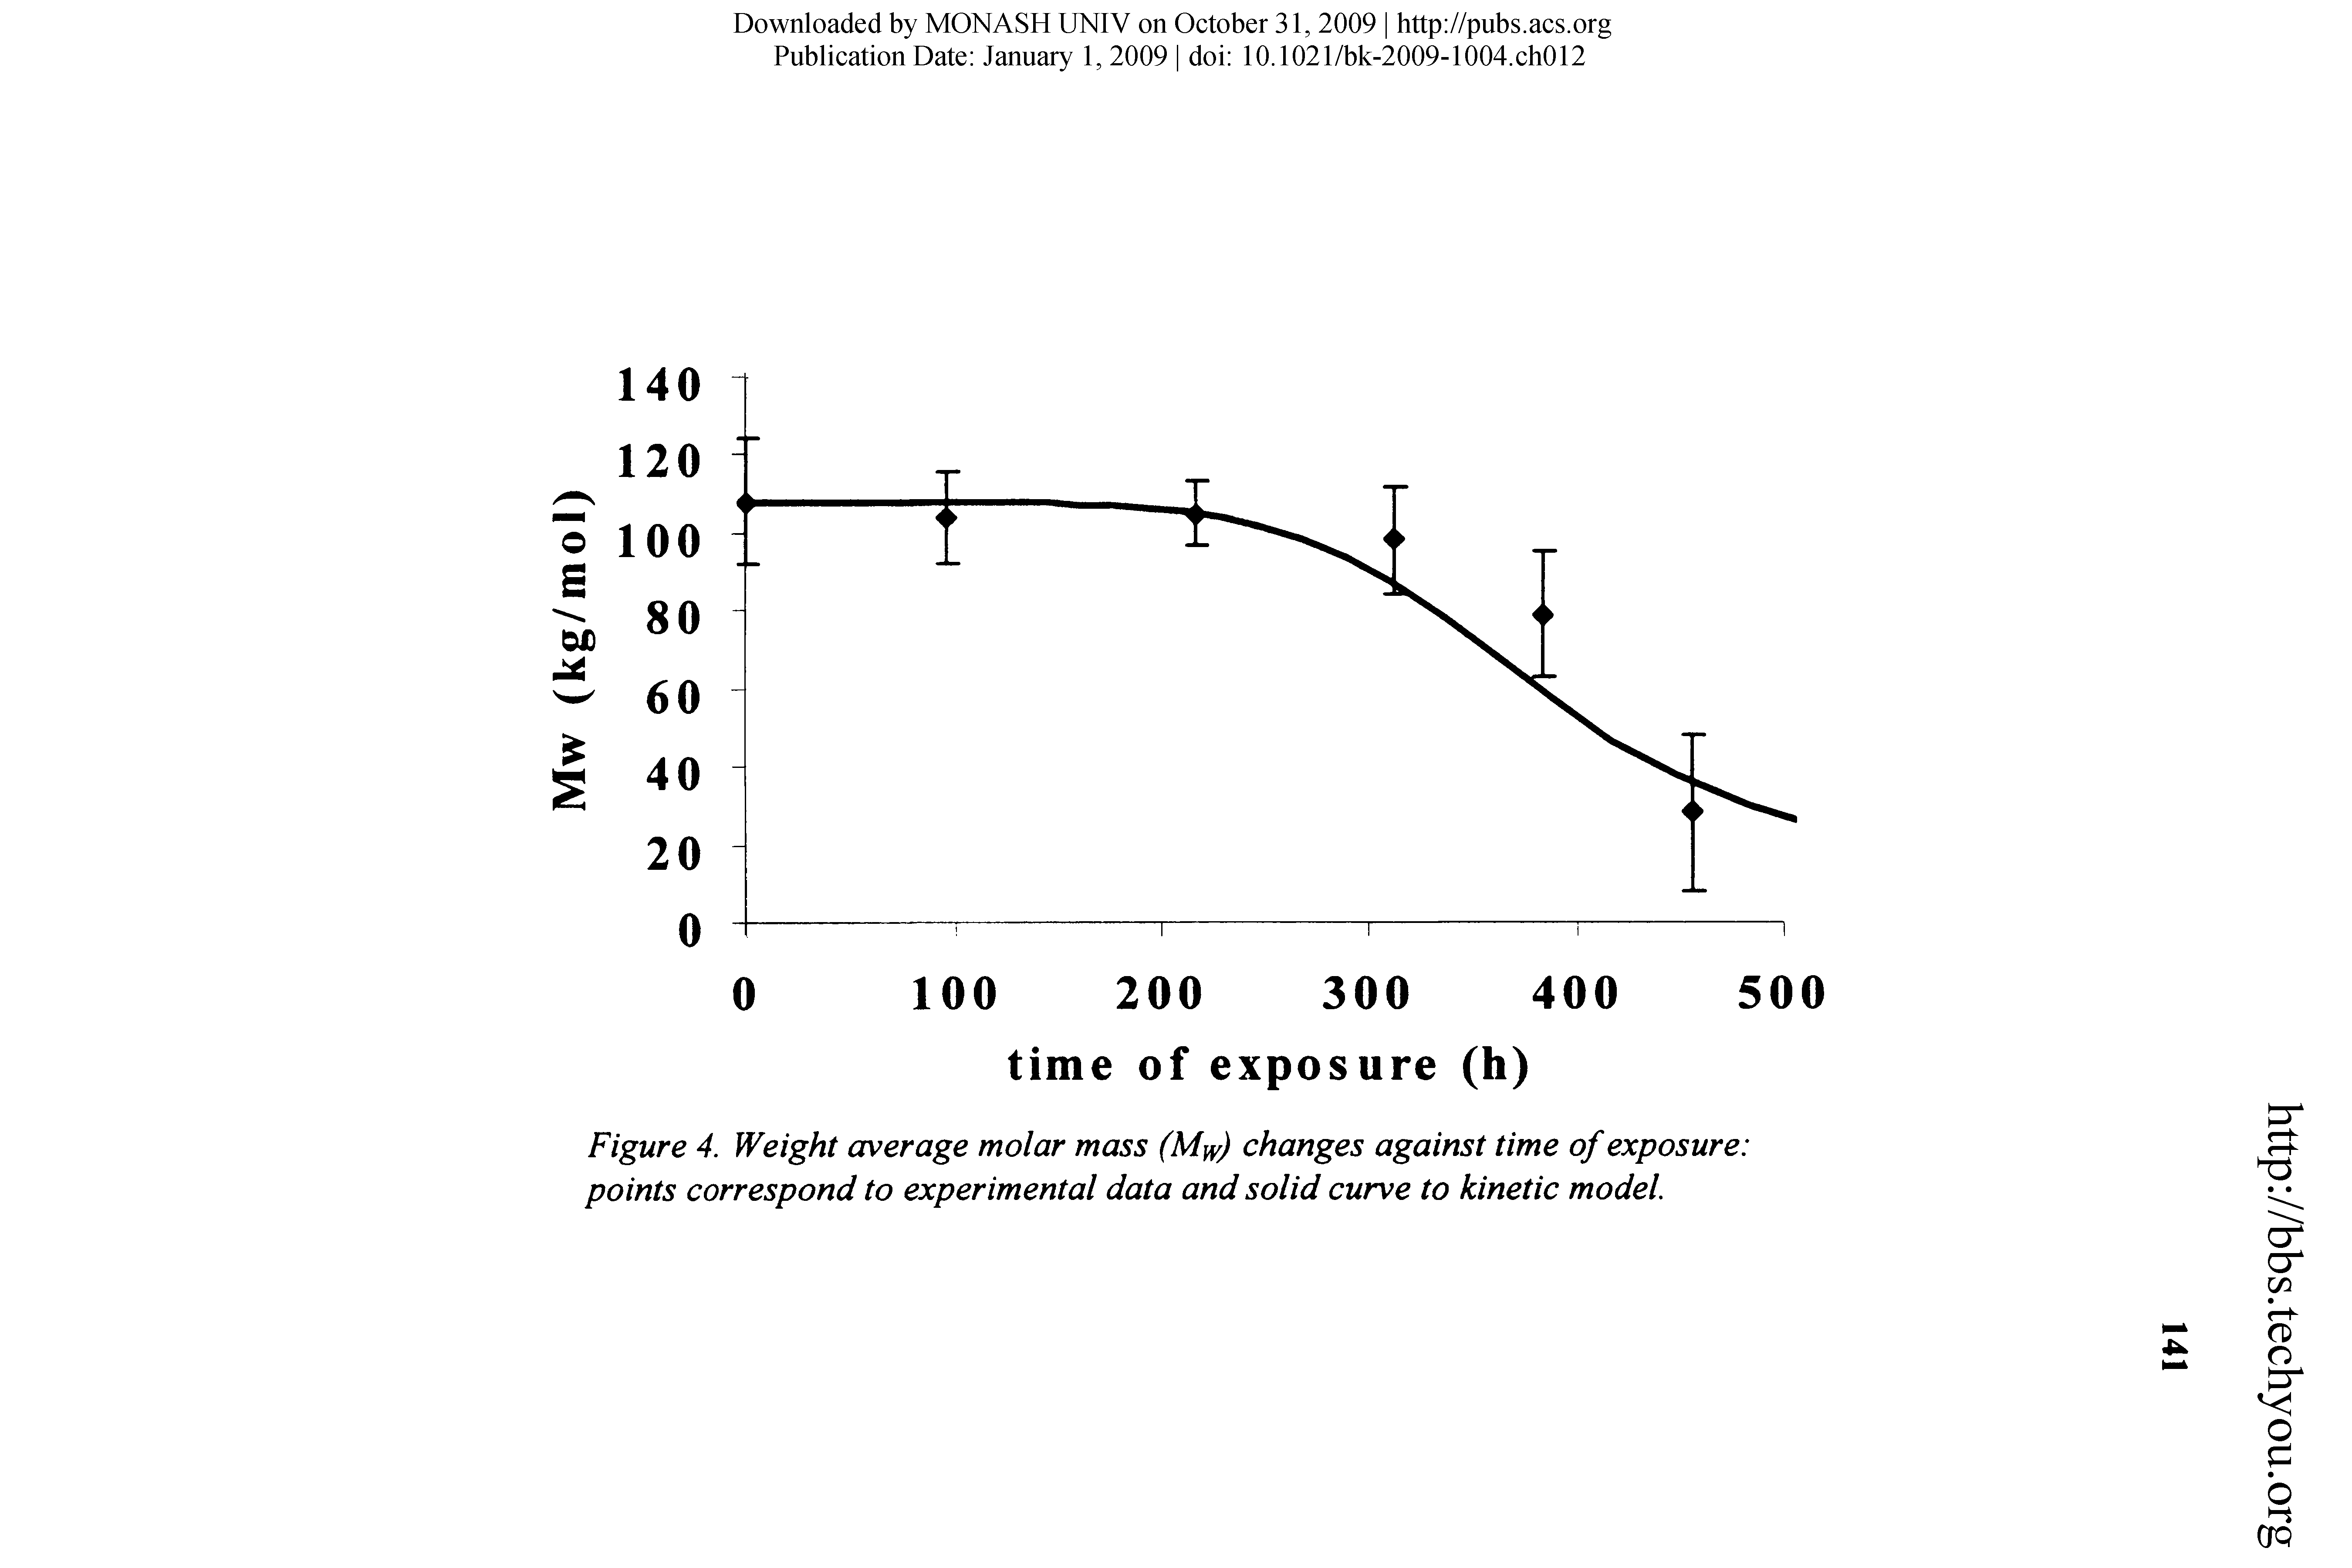 Figure 4. Weight average molar mass (M y) changes against time of exposure points correspond to experimental data and solid curve to kinetic model...